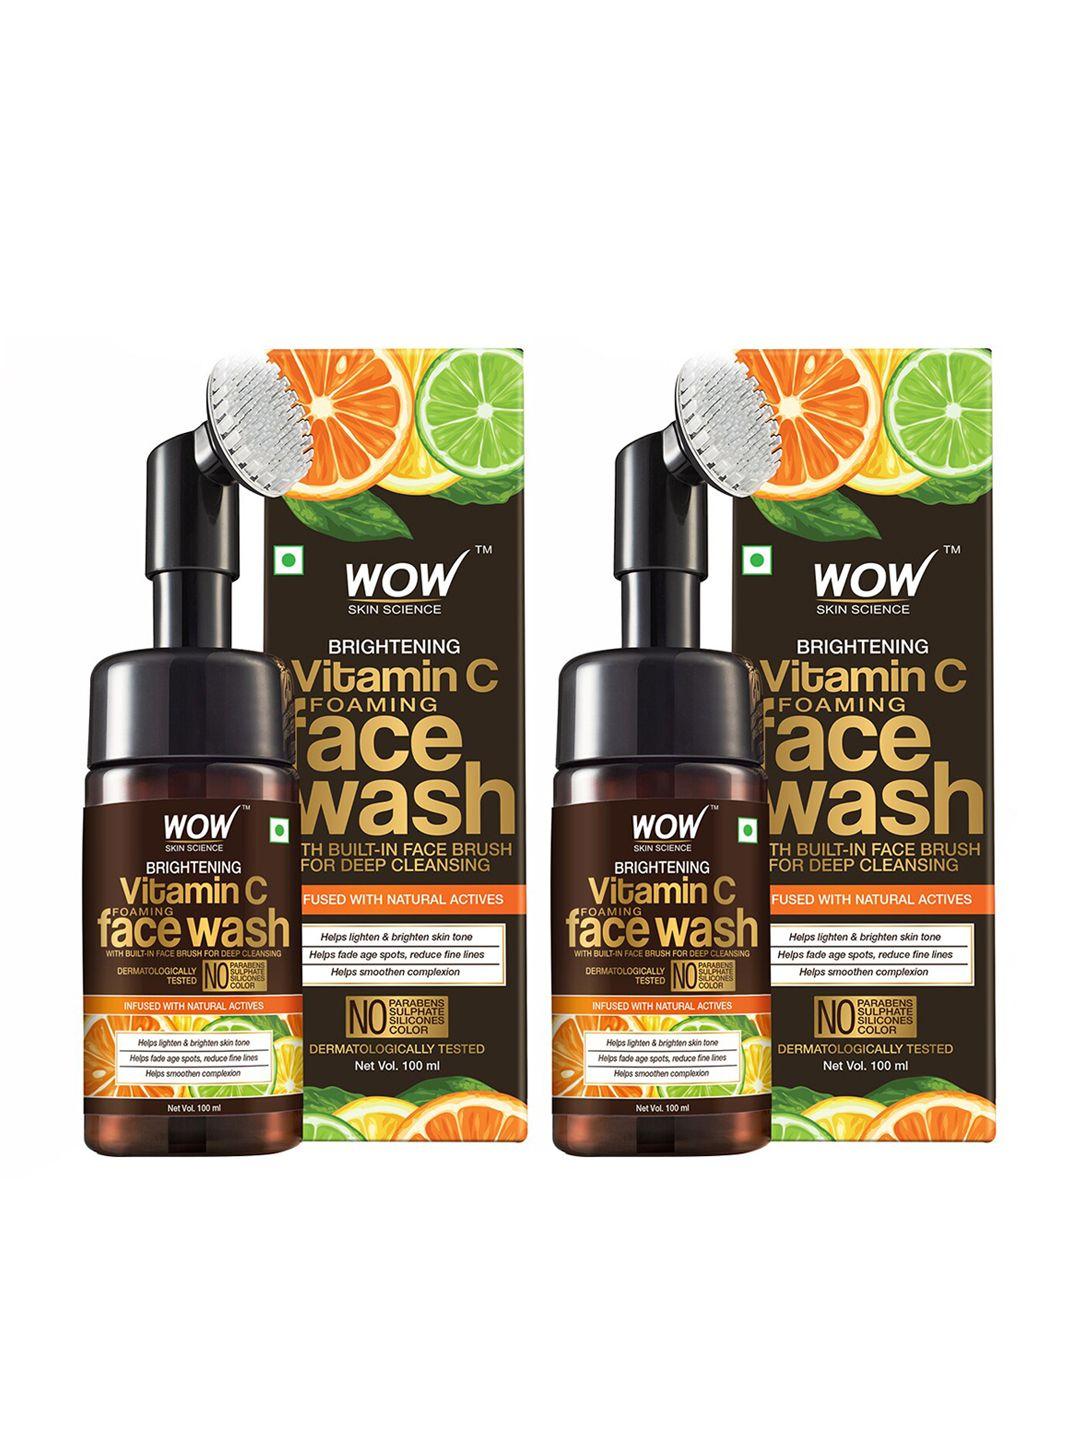 wow skin science set of 2 brightening vitamin c foaming face wash with built-in brush